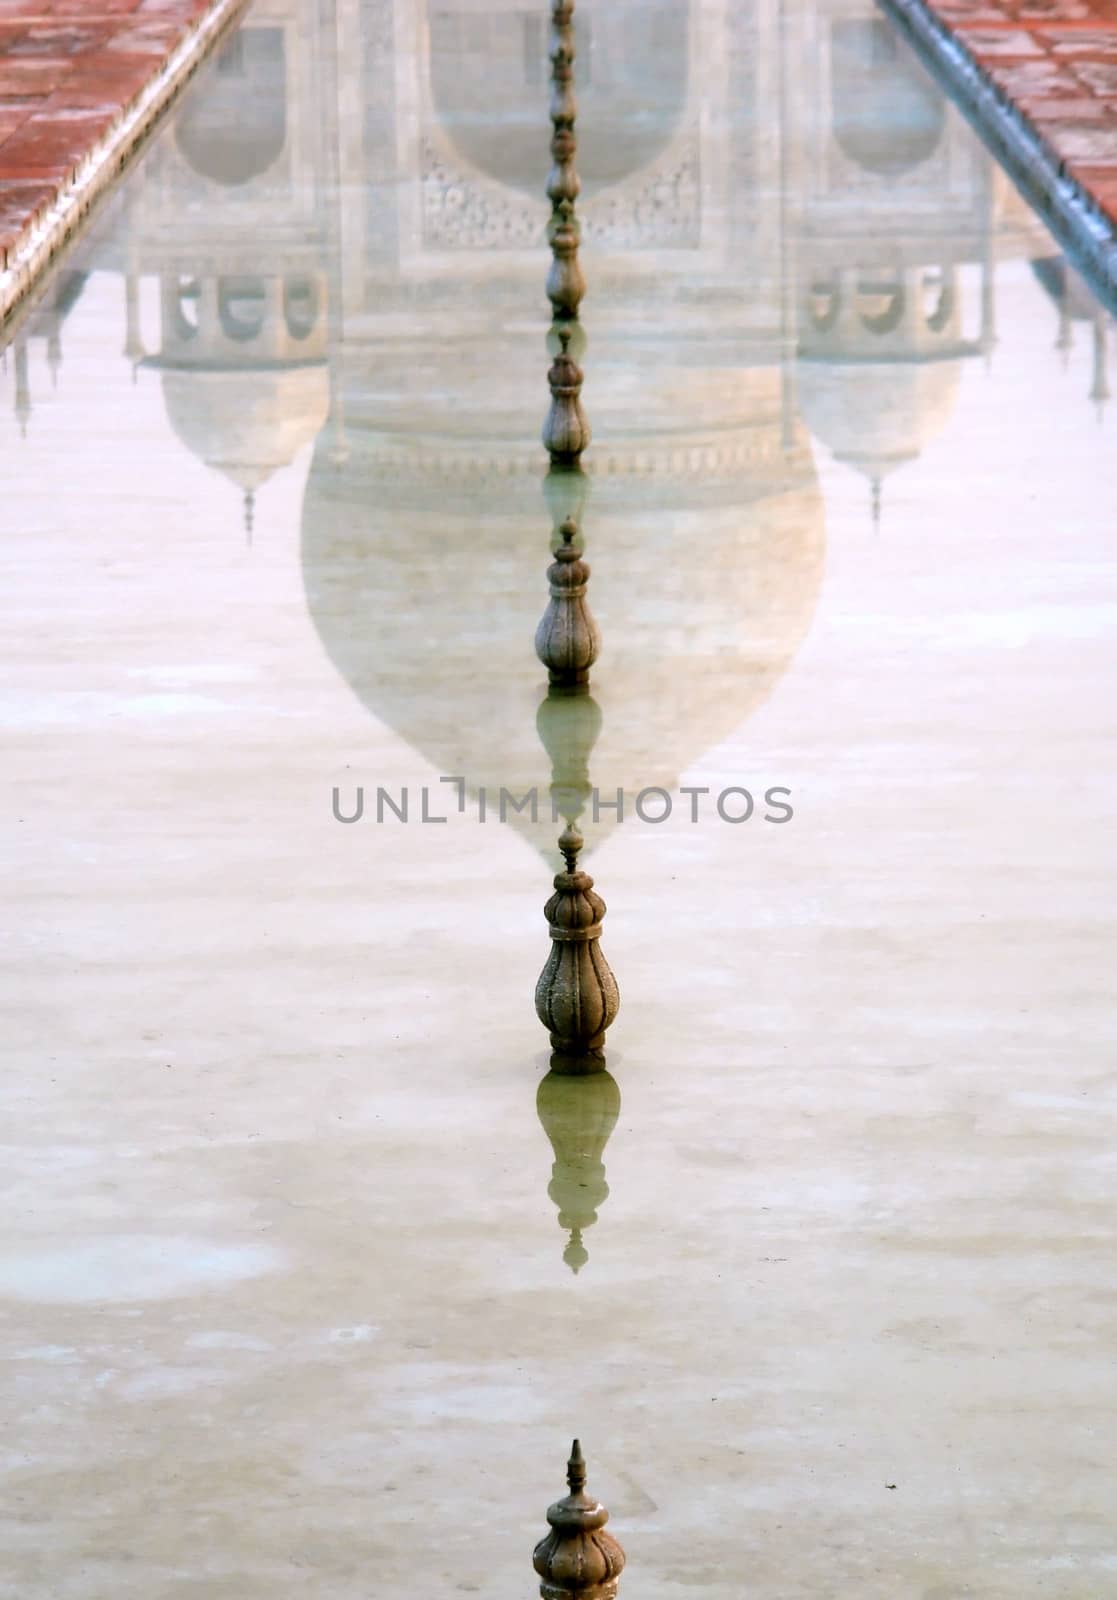 Overview of the Taj Mahal reflection in water feature by ptxgarfield